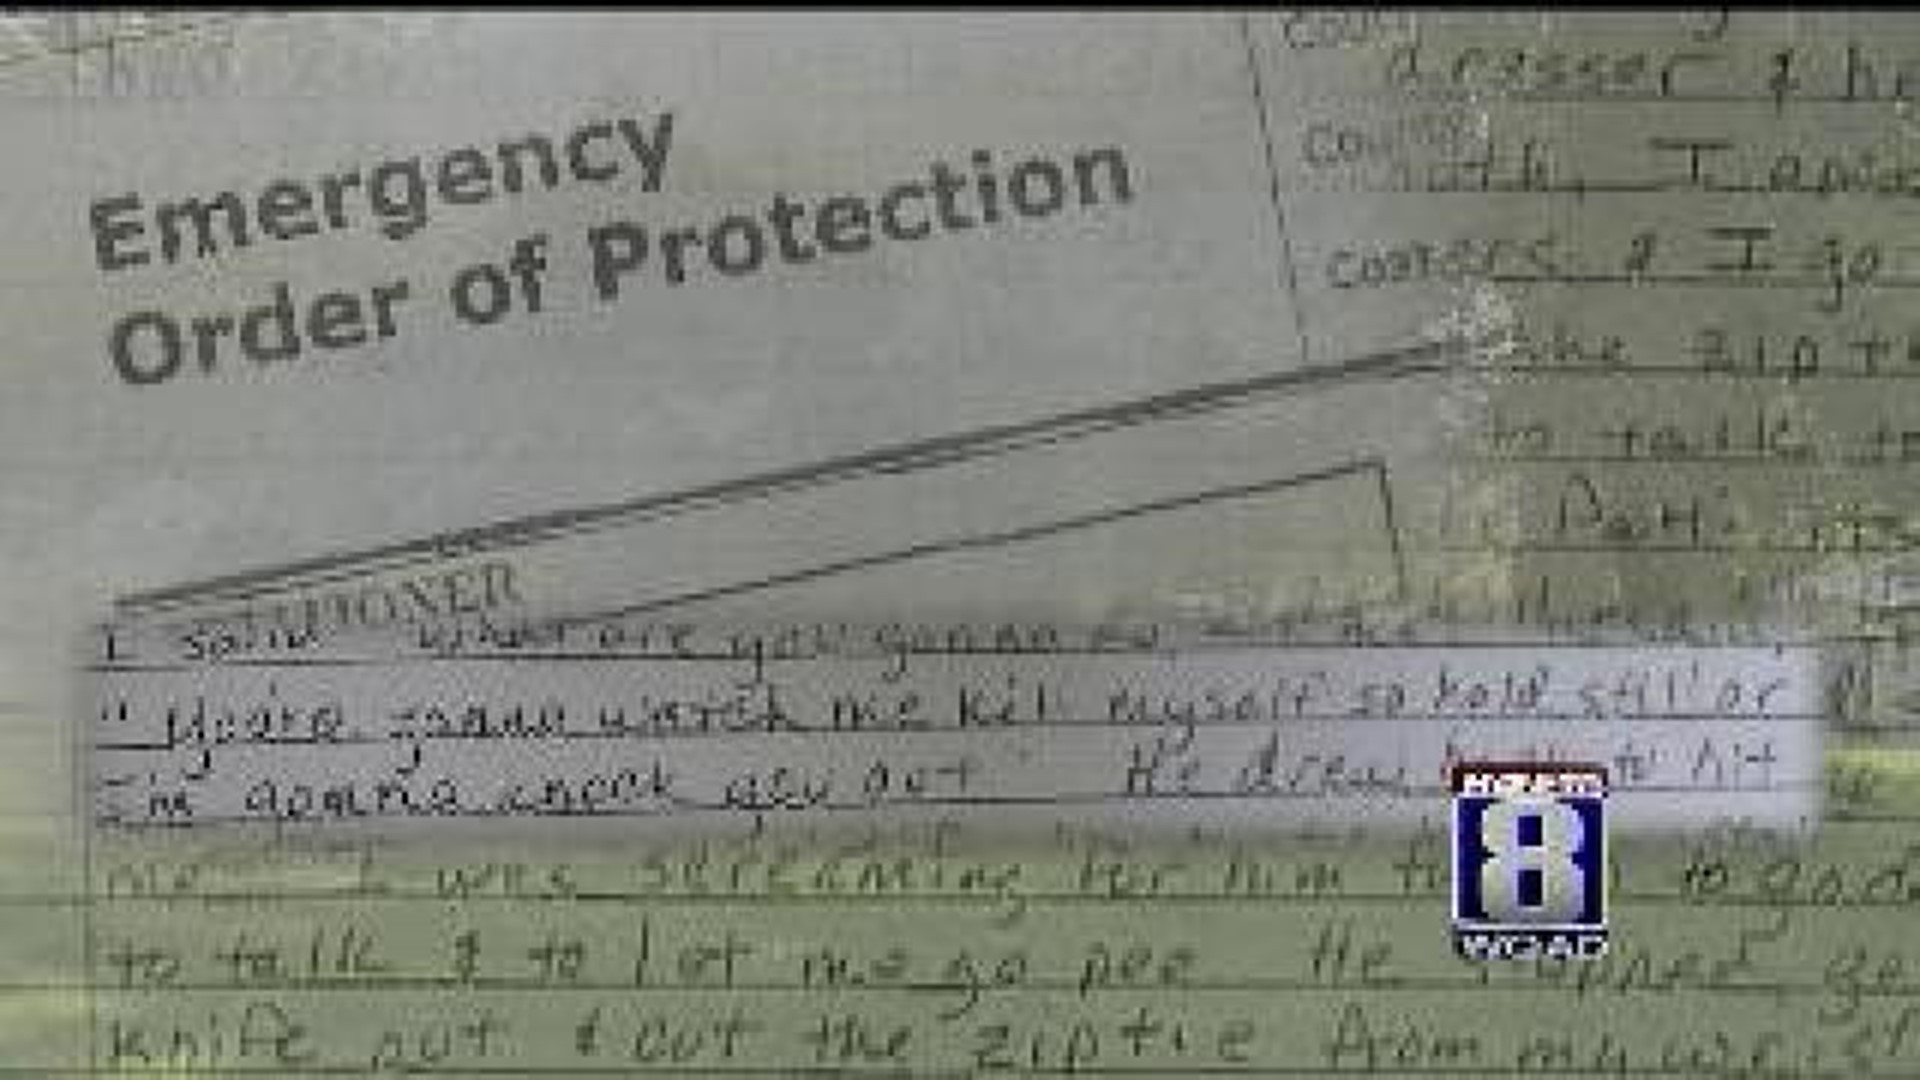 Order of protection report details abuse of Aledo woman days before she died